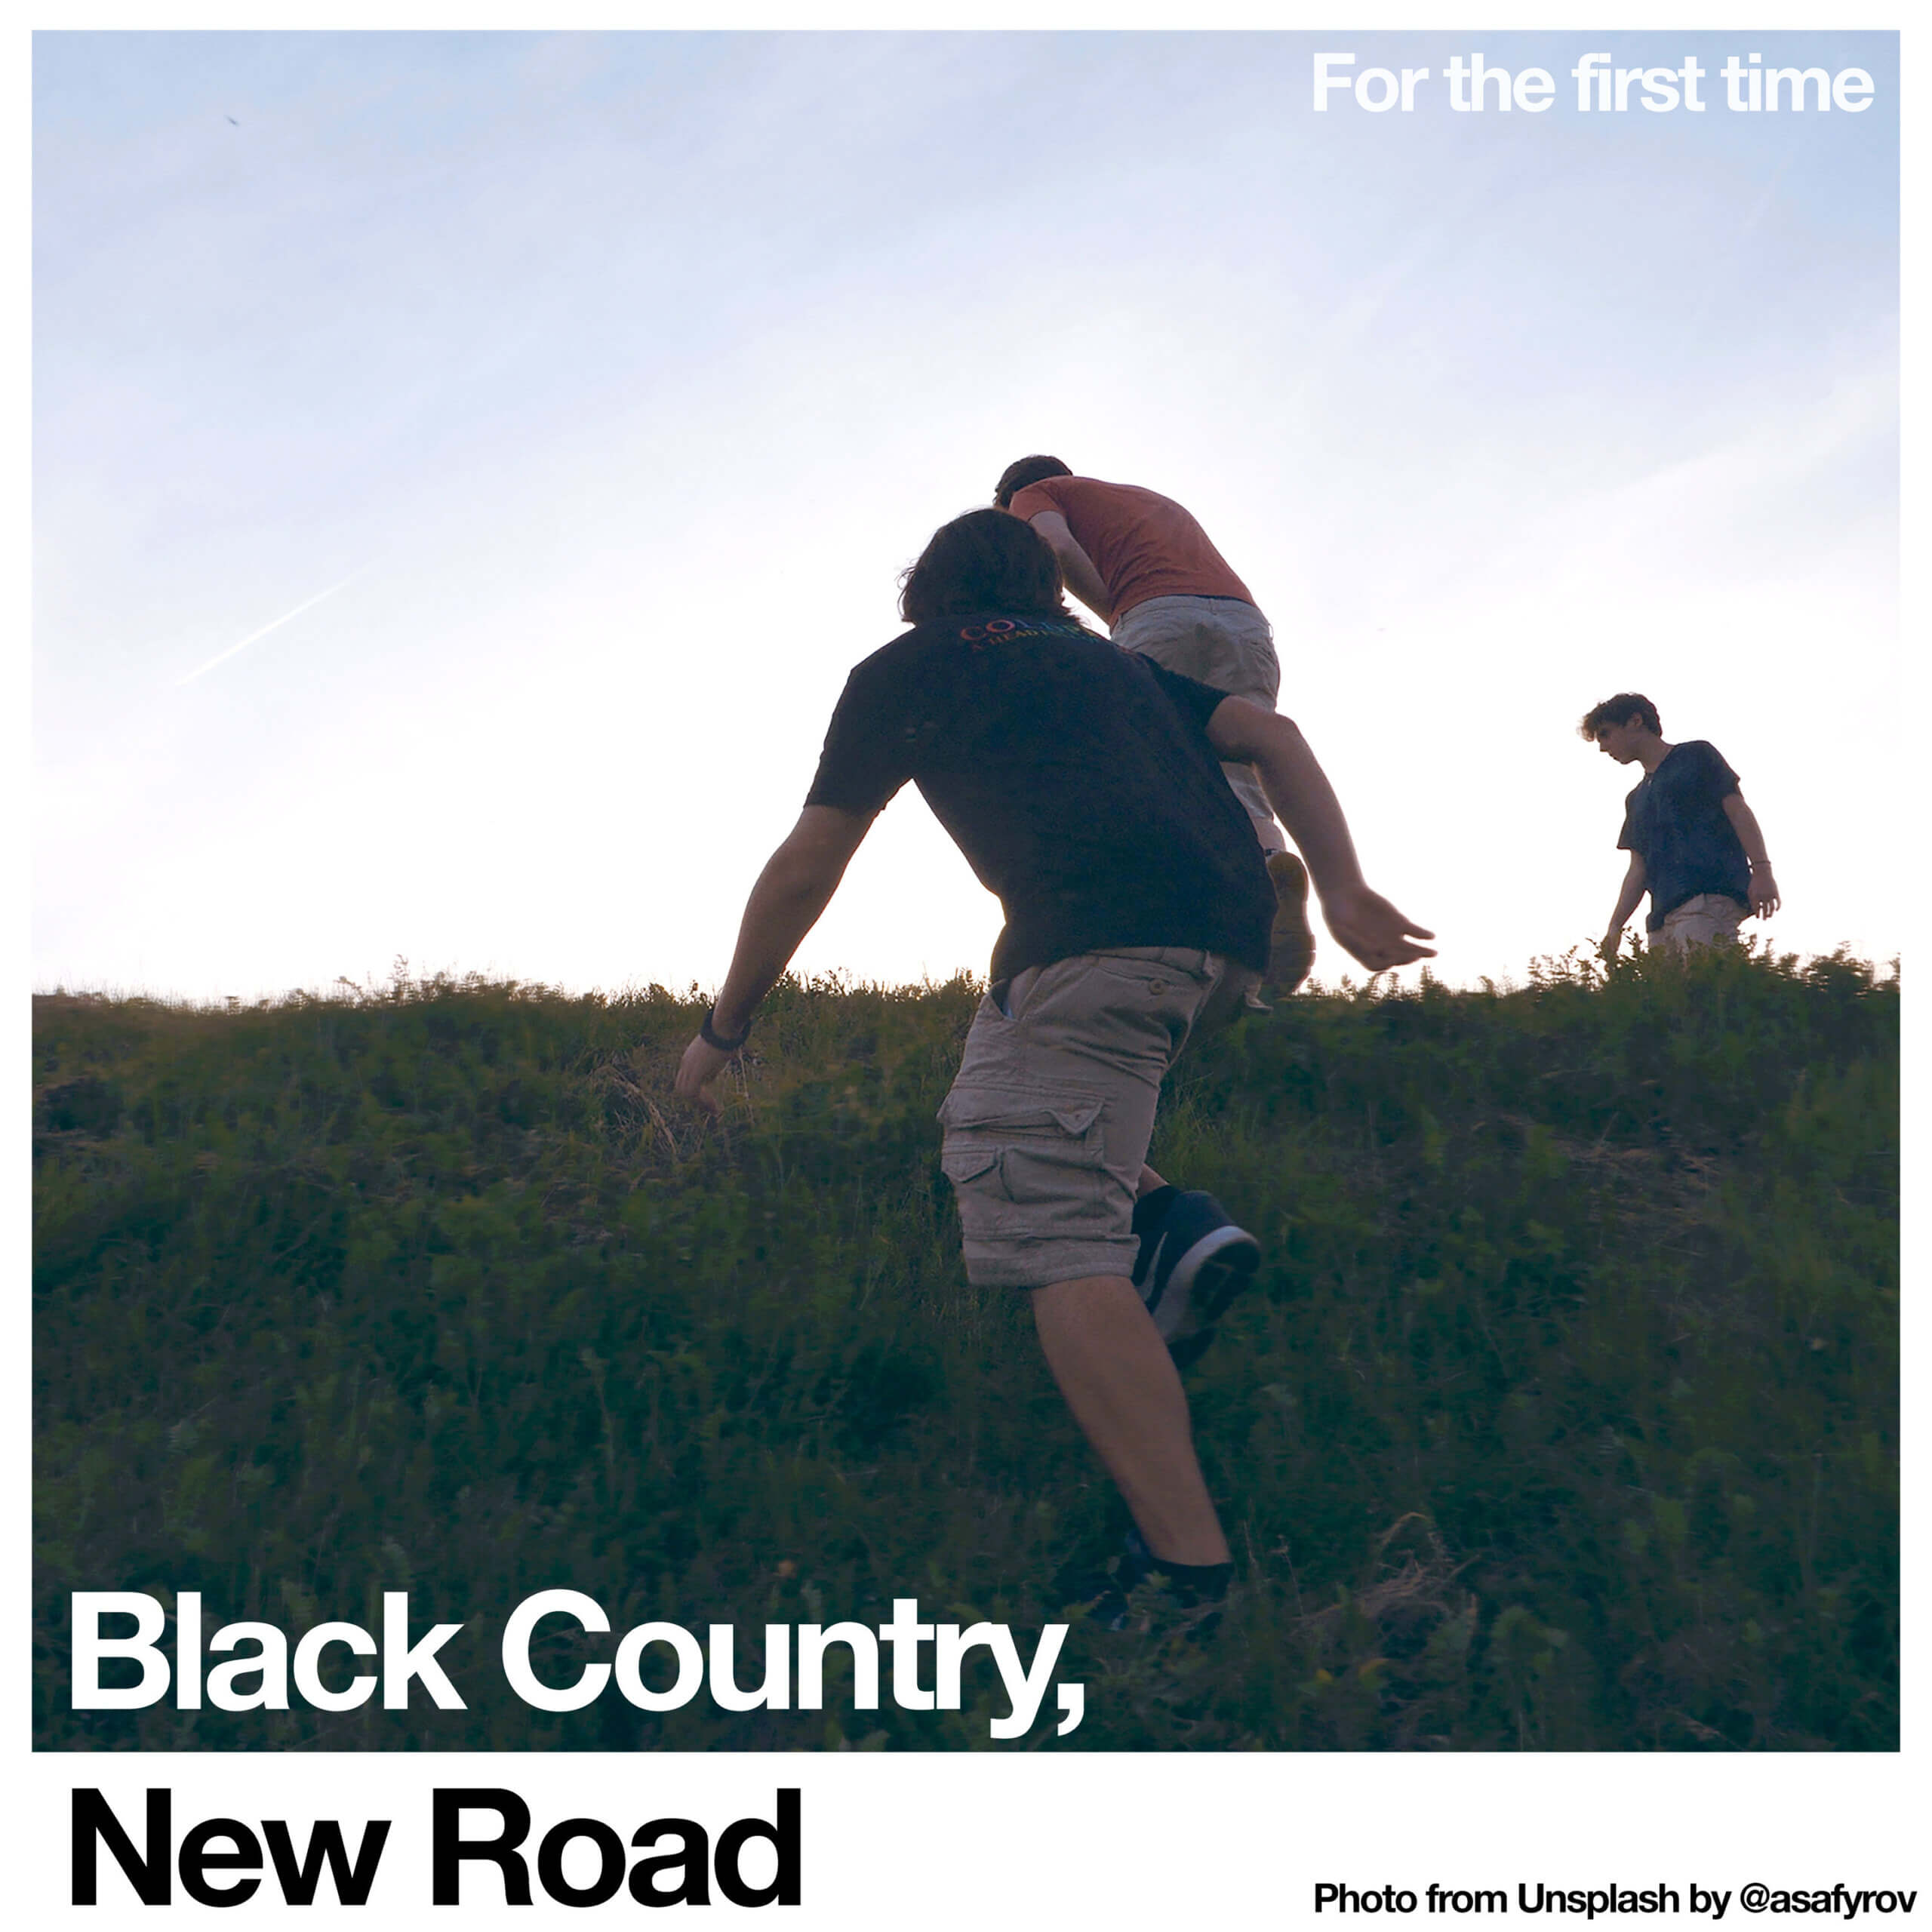 For The First Time by Black Country, New Road album review by Leslie Chu for Northern Transmissions